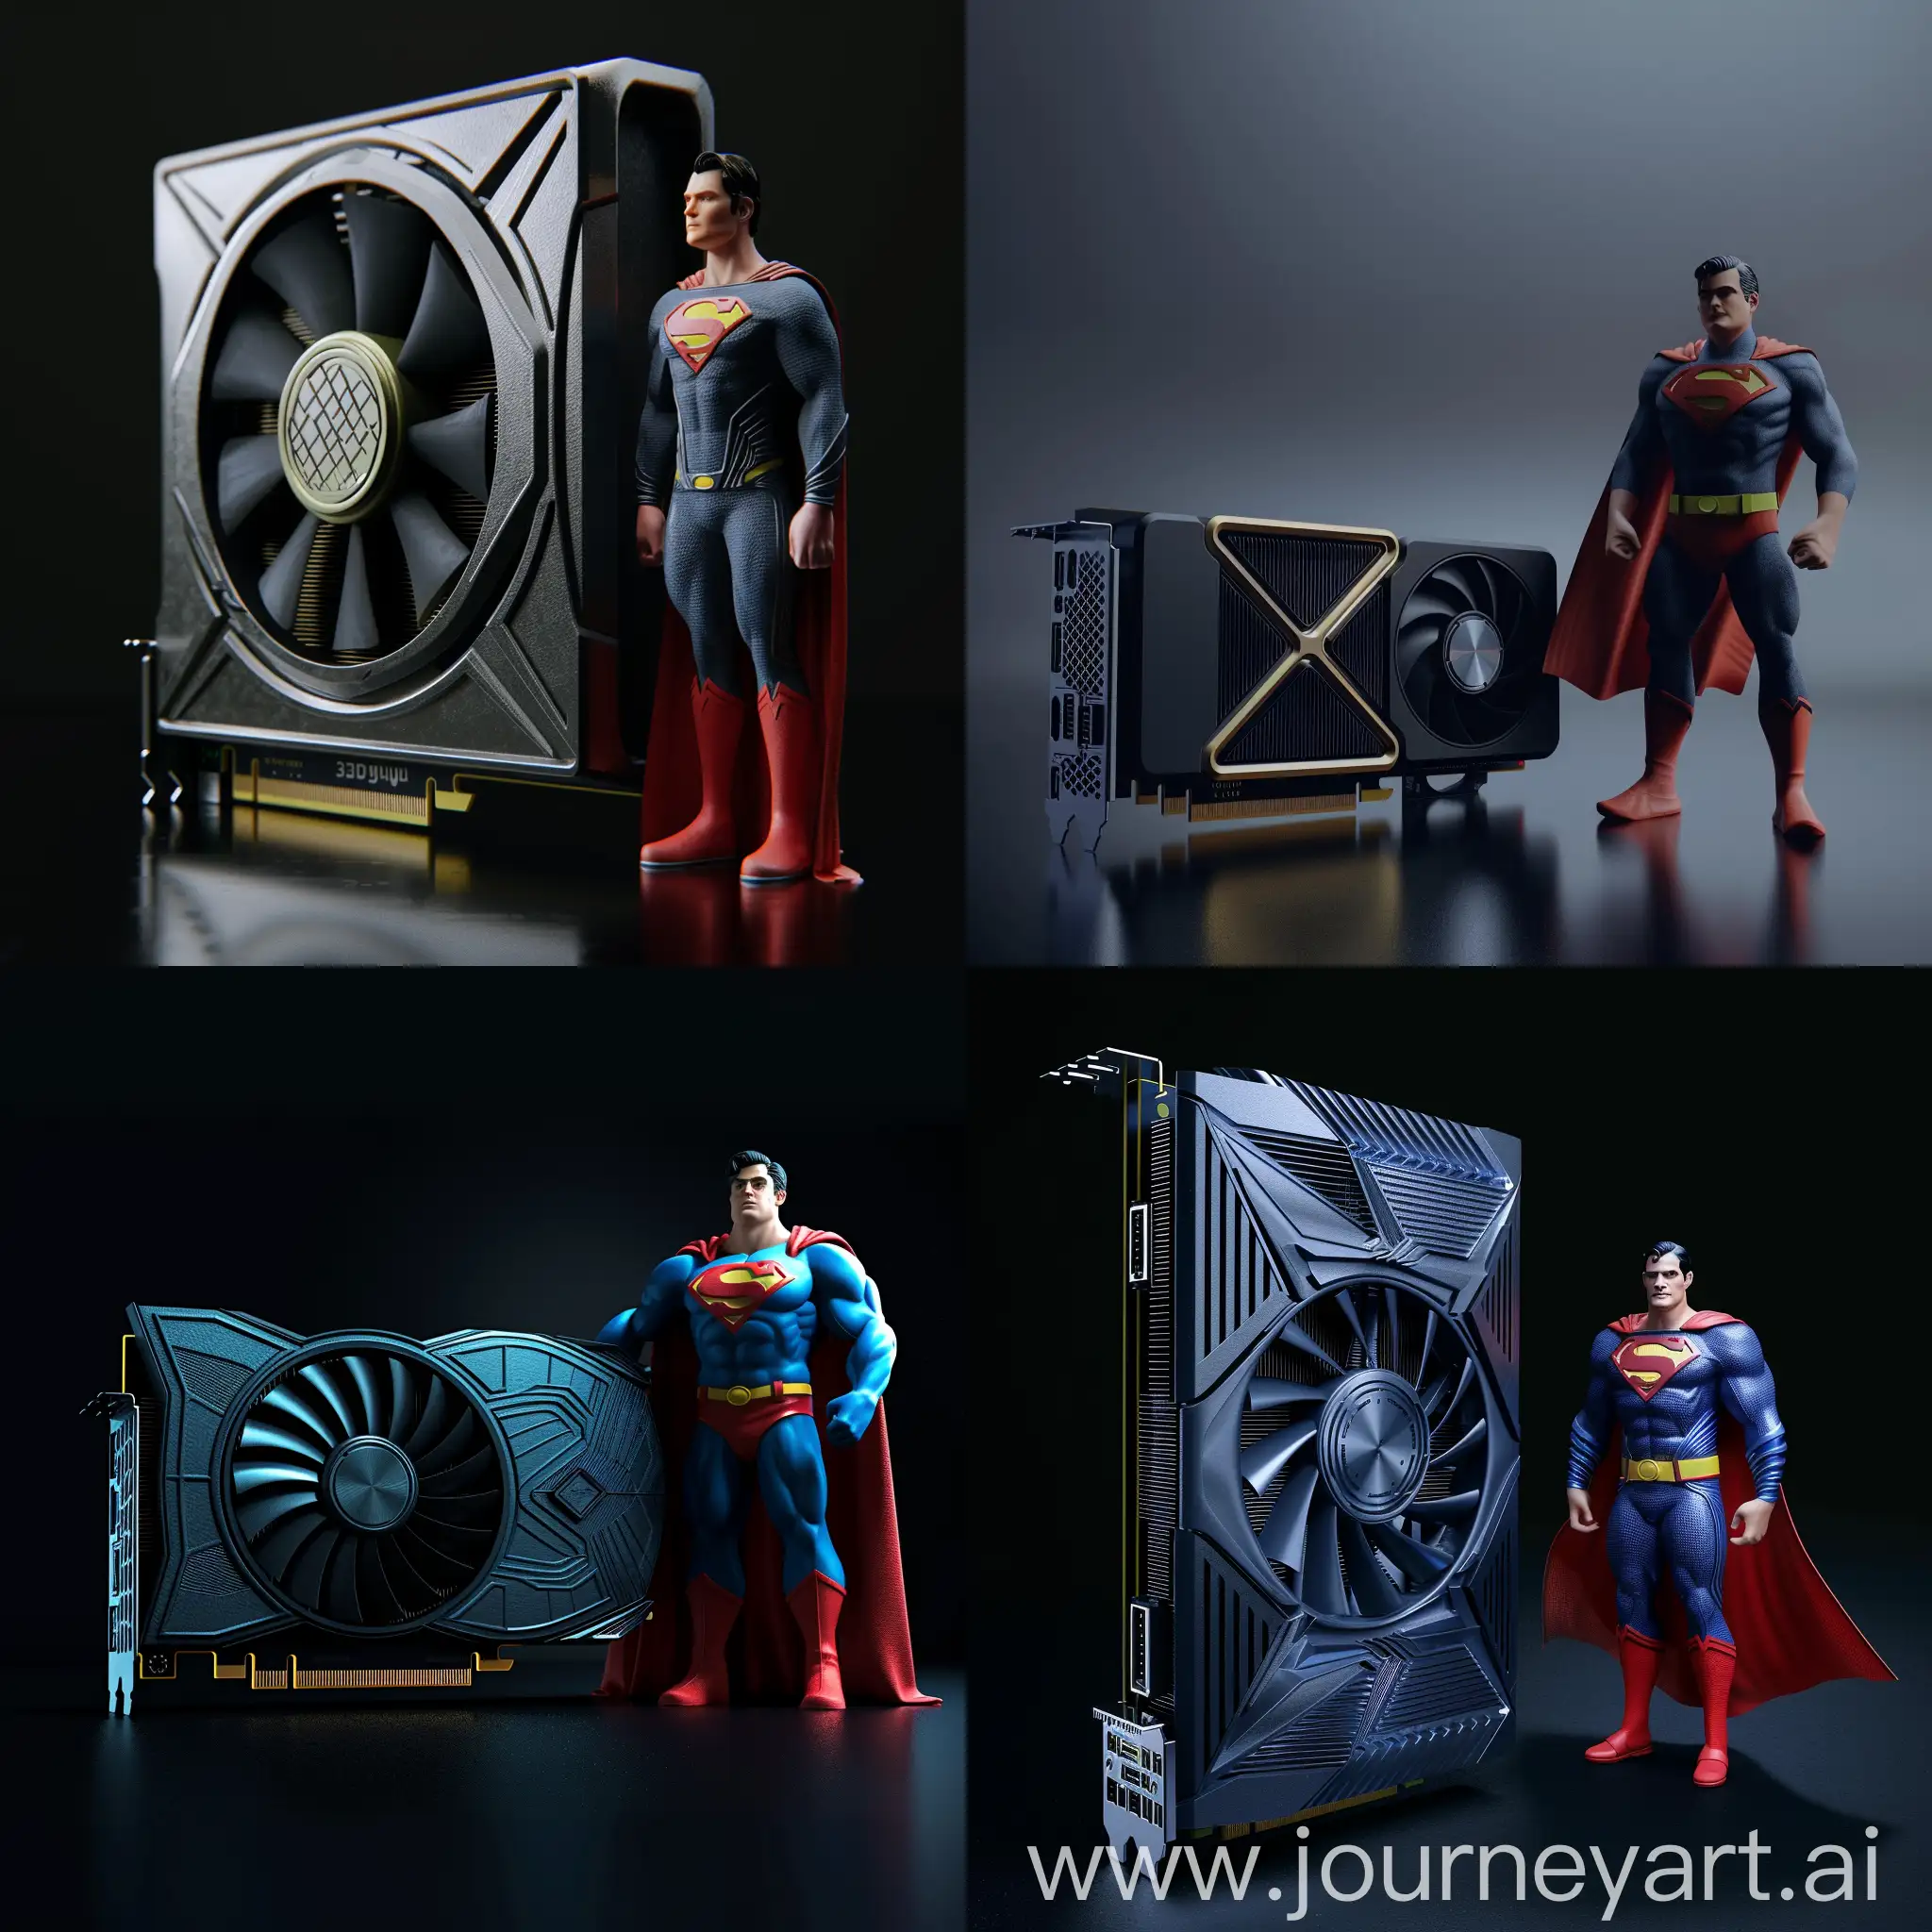 Make a picture of a 3D graphics card with Superman standing next to it